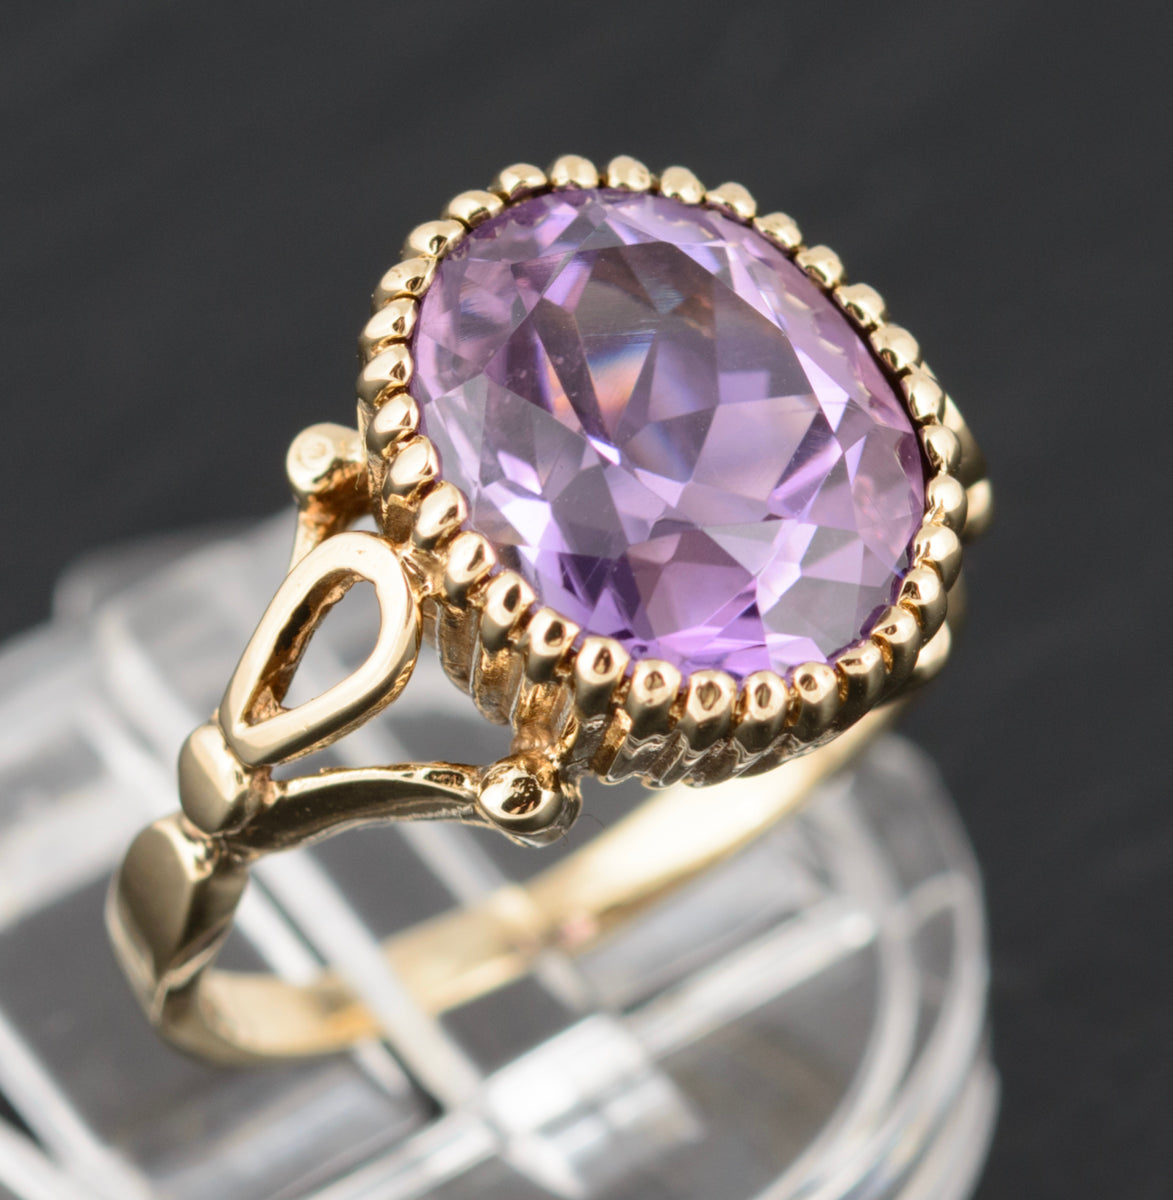 Vintage 9ct Gold Ring With Natural Amethyst Gemstone & Decorative Mount  (A1505)